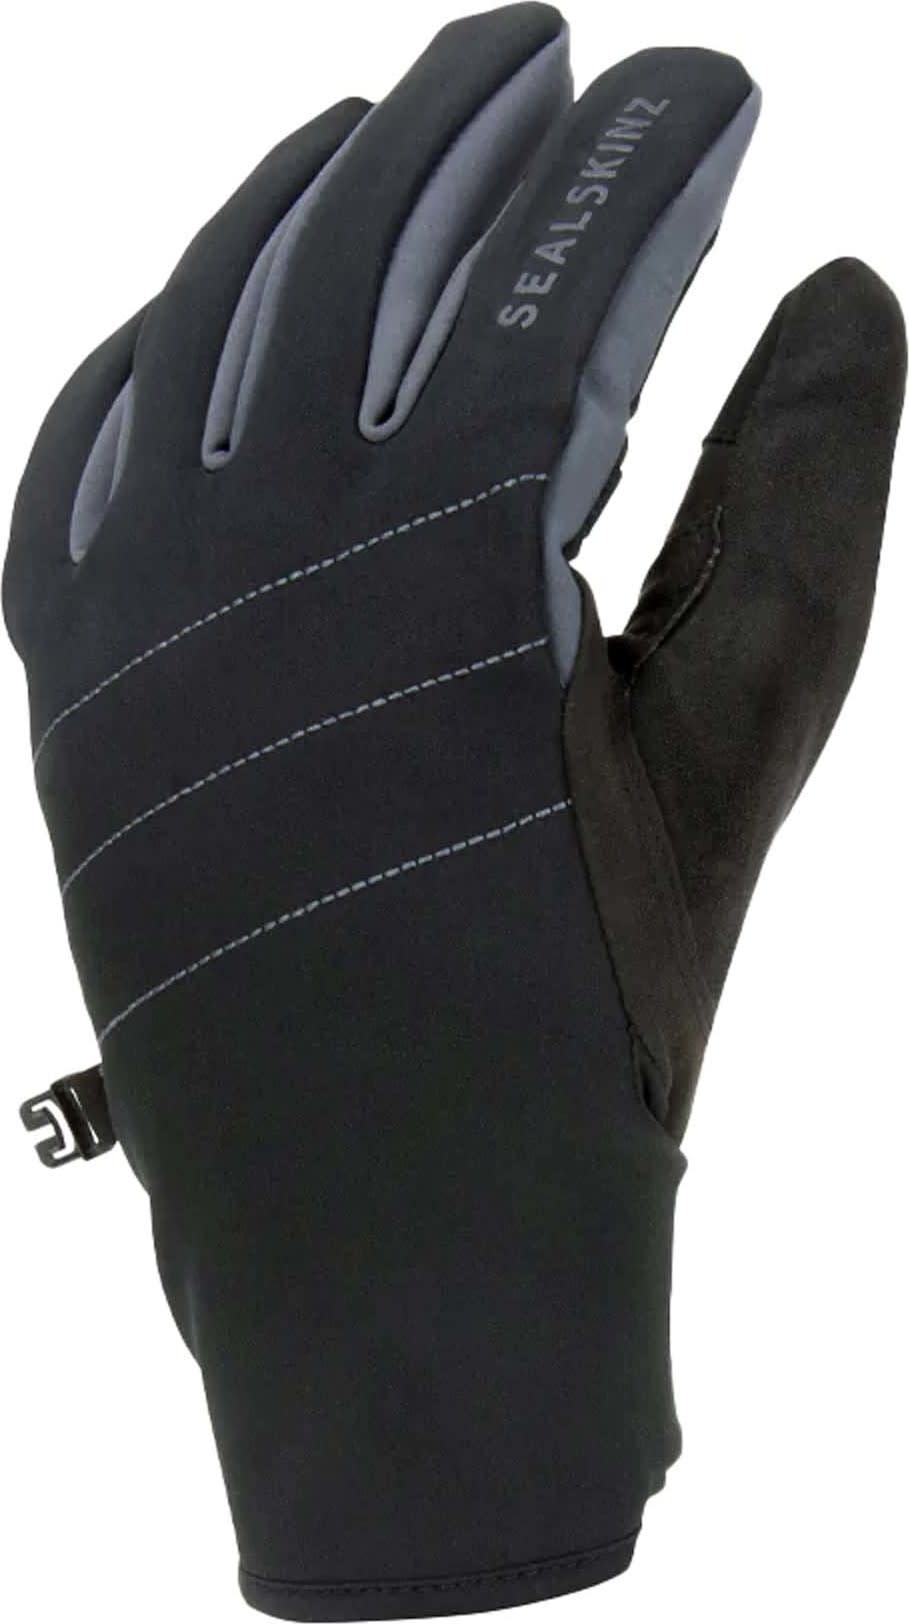 Sealskinz Waterproof All Weather Glove with Fusion Control Black/Grey